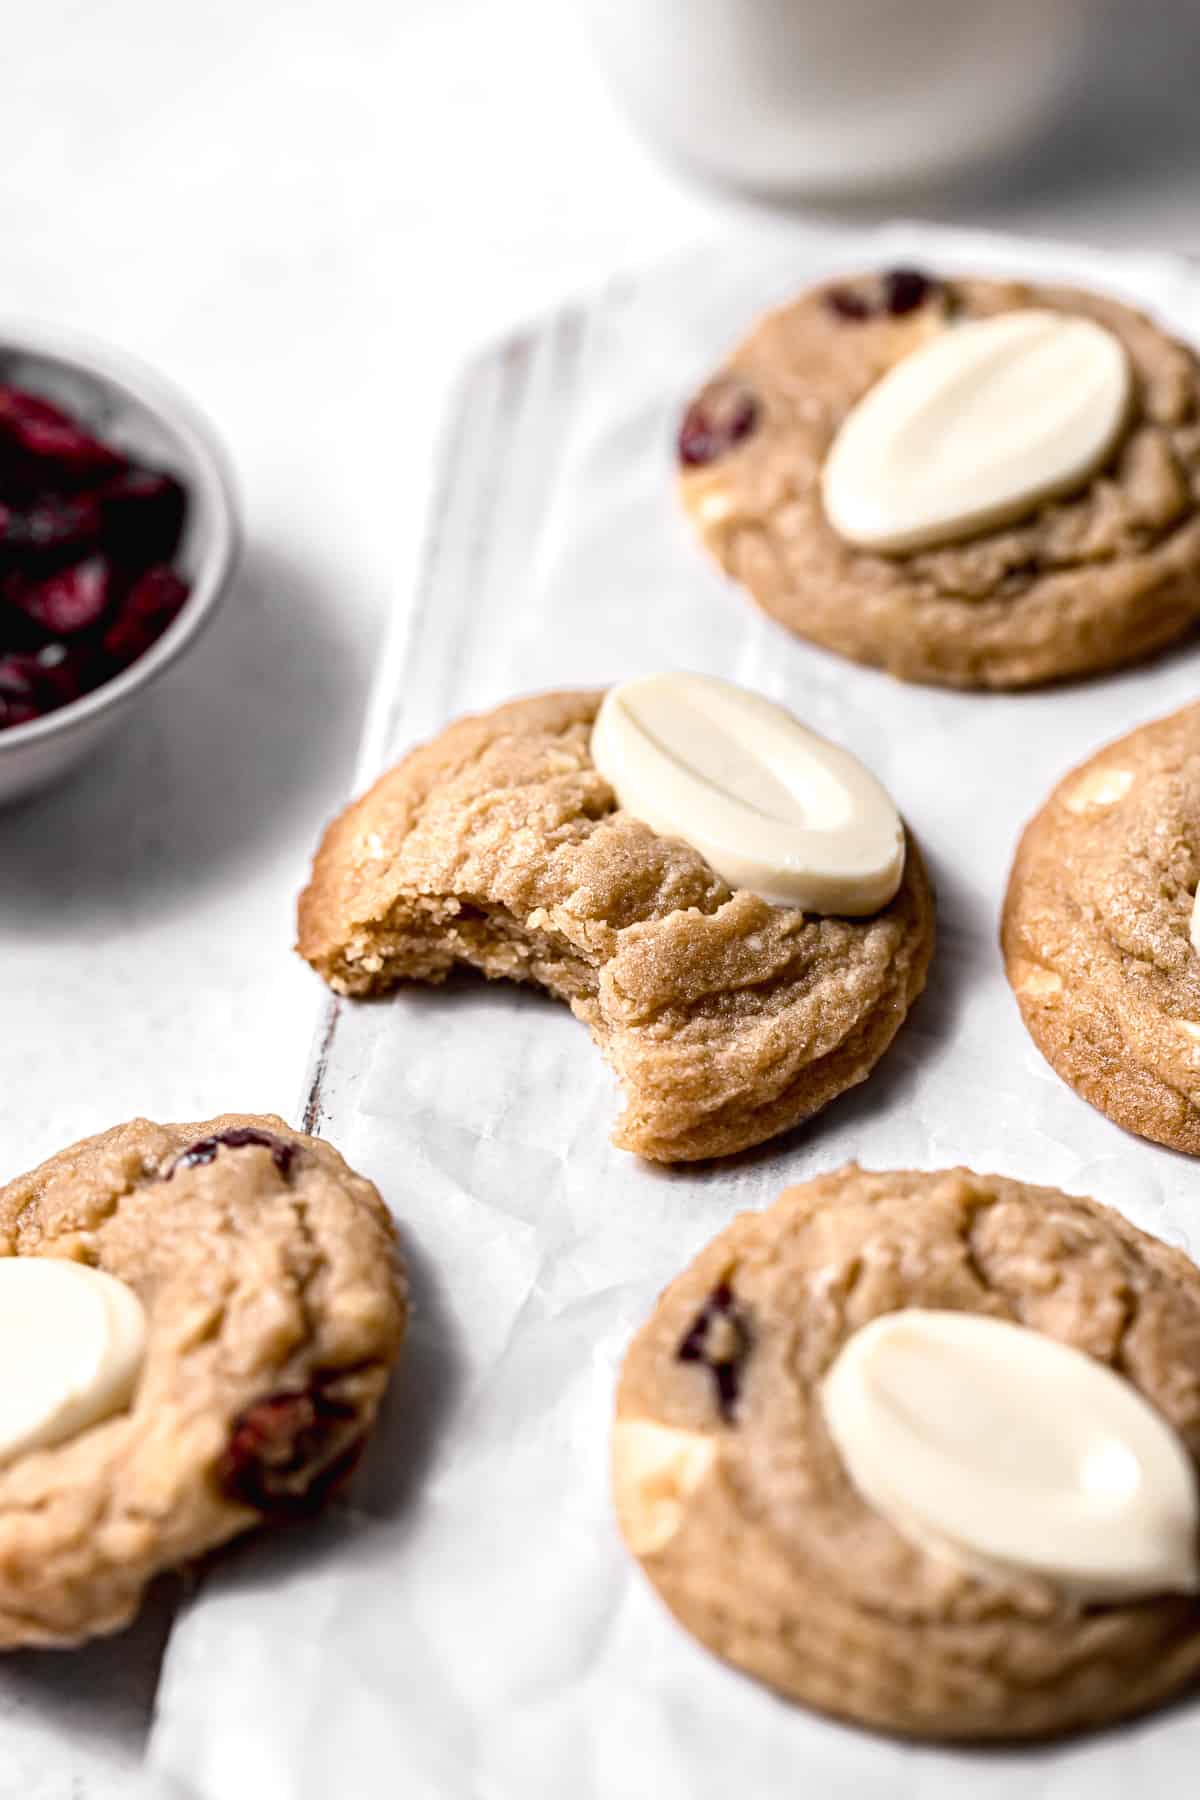 white chocolate cranberry cookies on white wooden board.